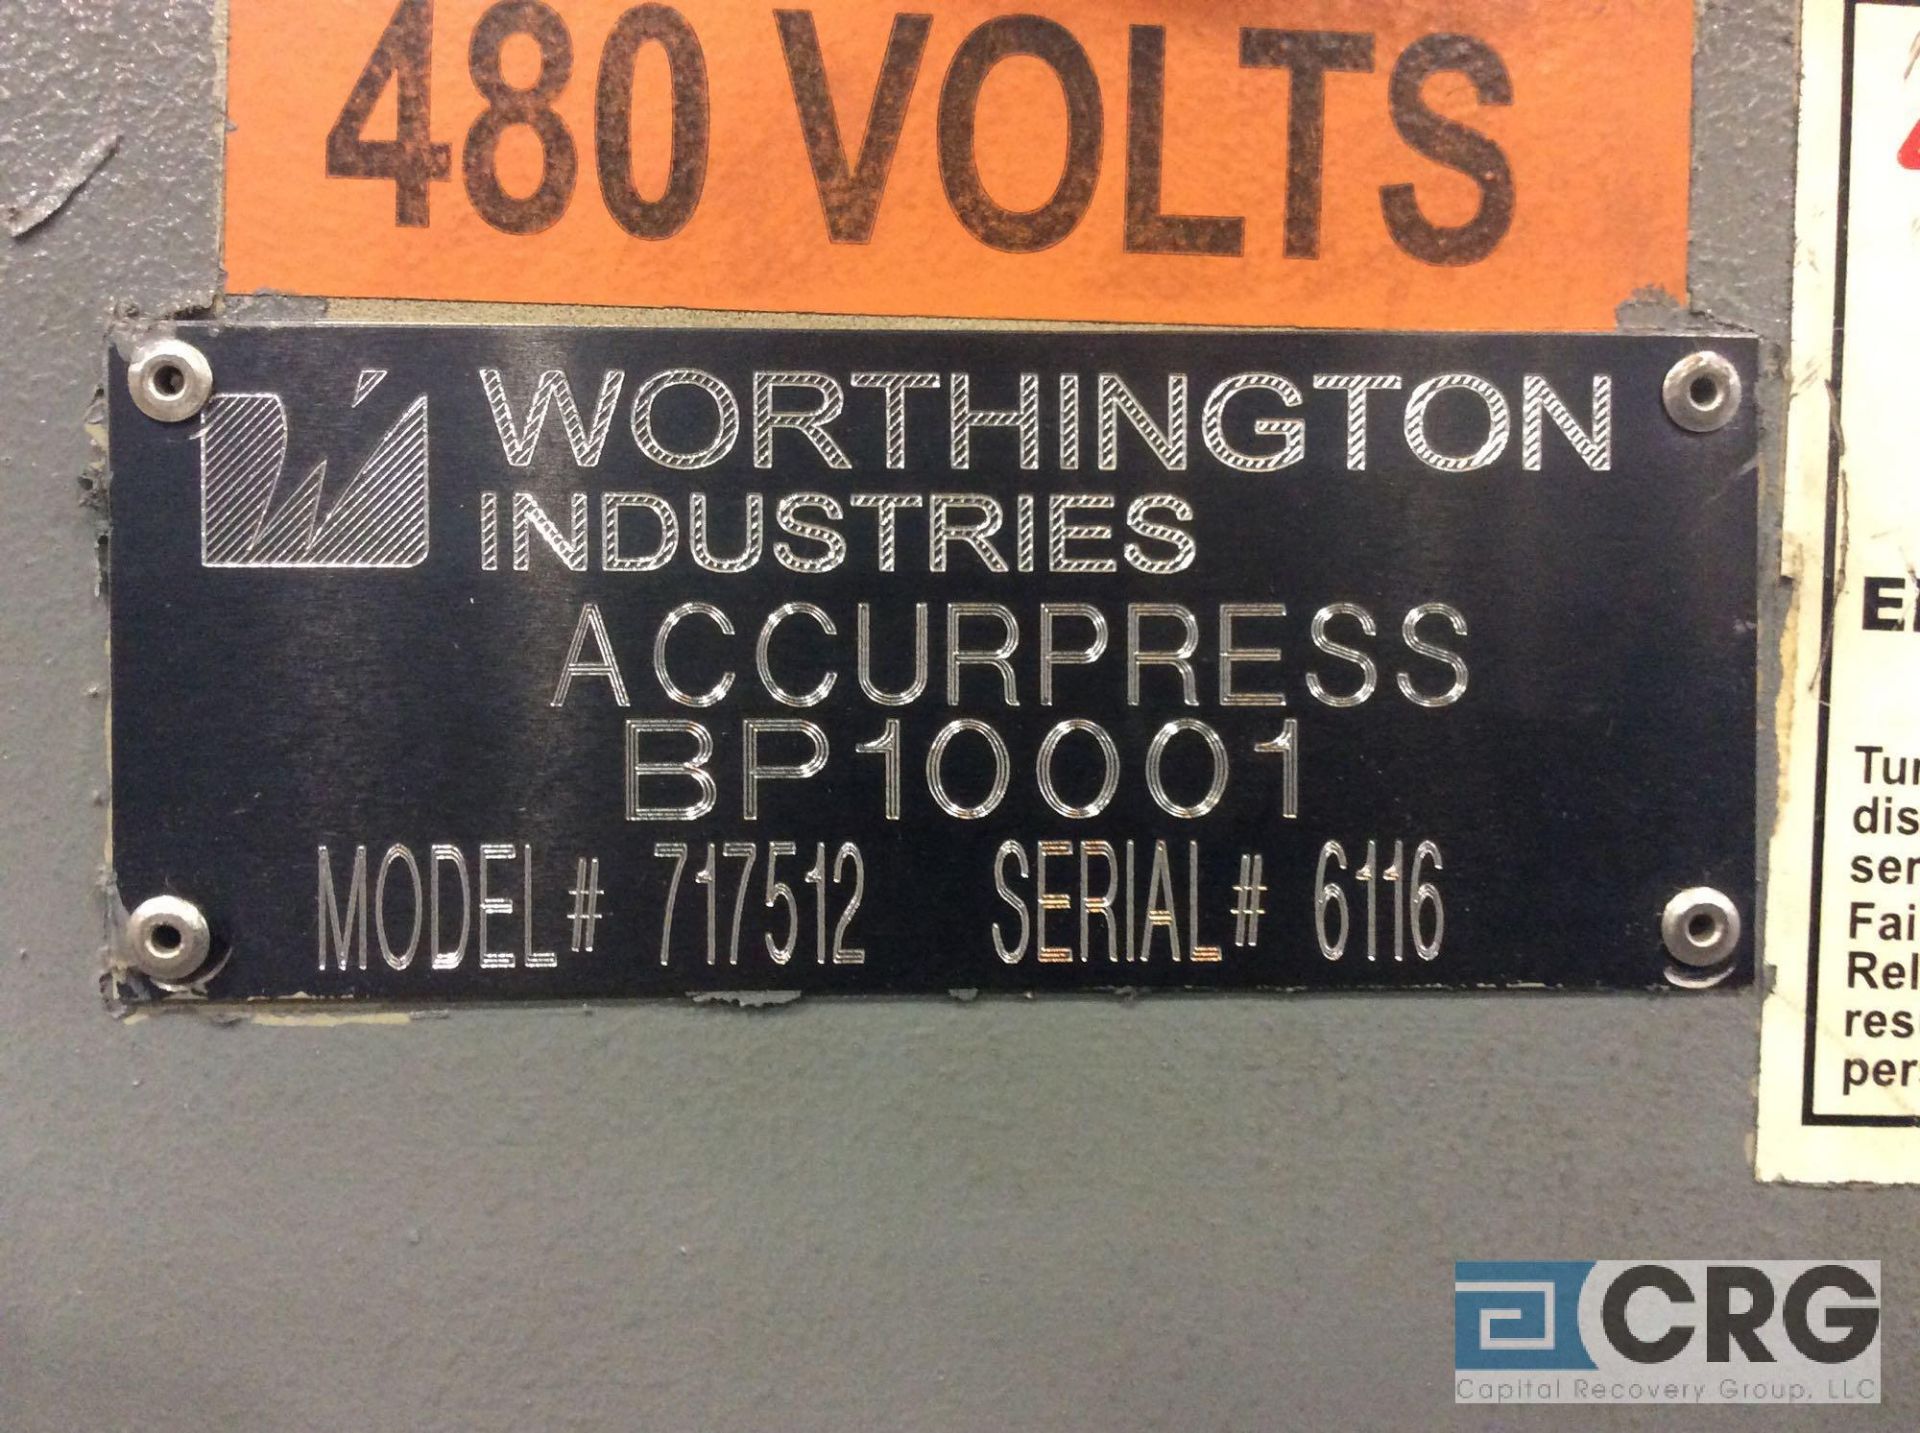 AccuPress 717512 CNC hydraulic press brake, 175 ton cap, 12 foot, with ACCUPRESS controls and ETS - Image 4 of 7